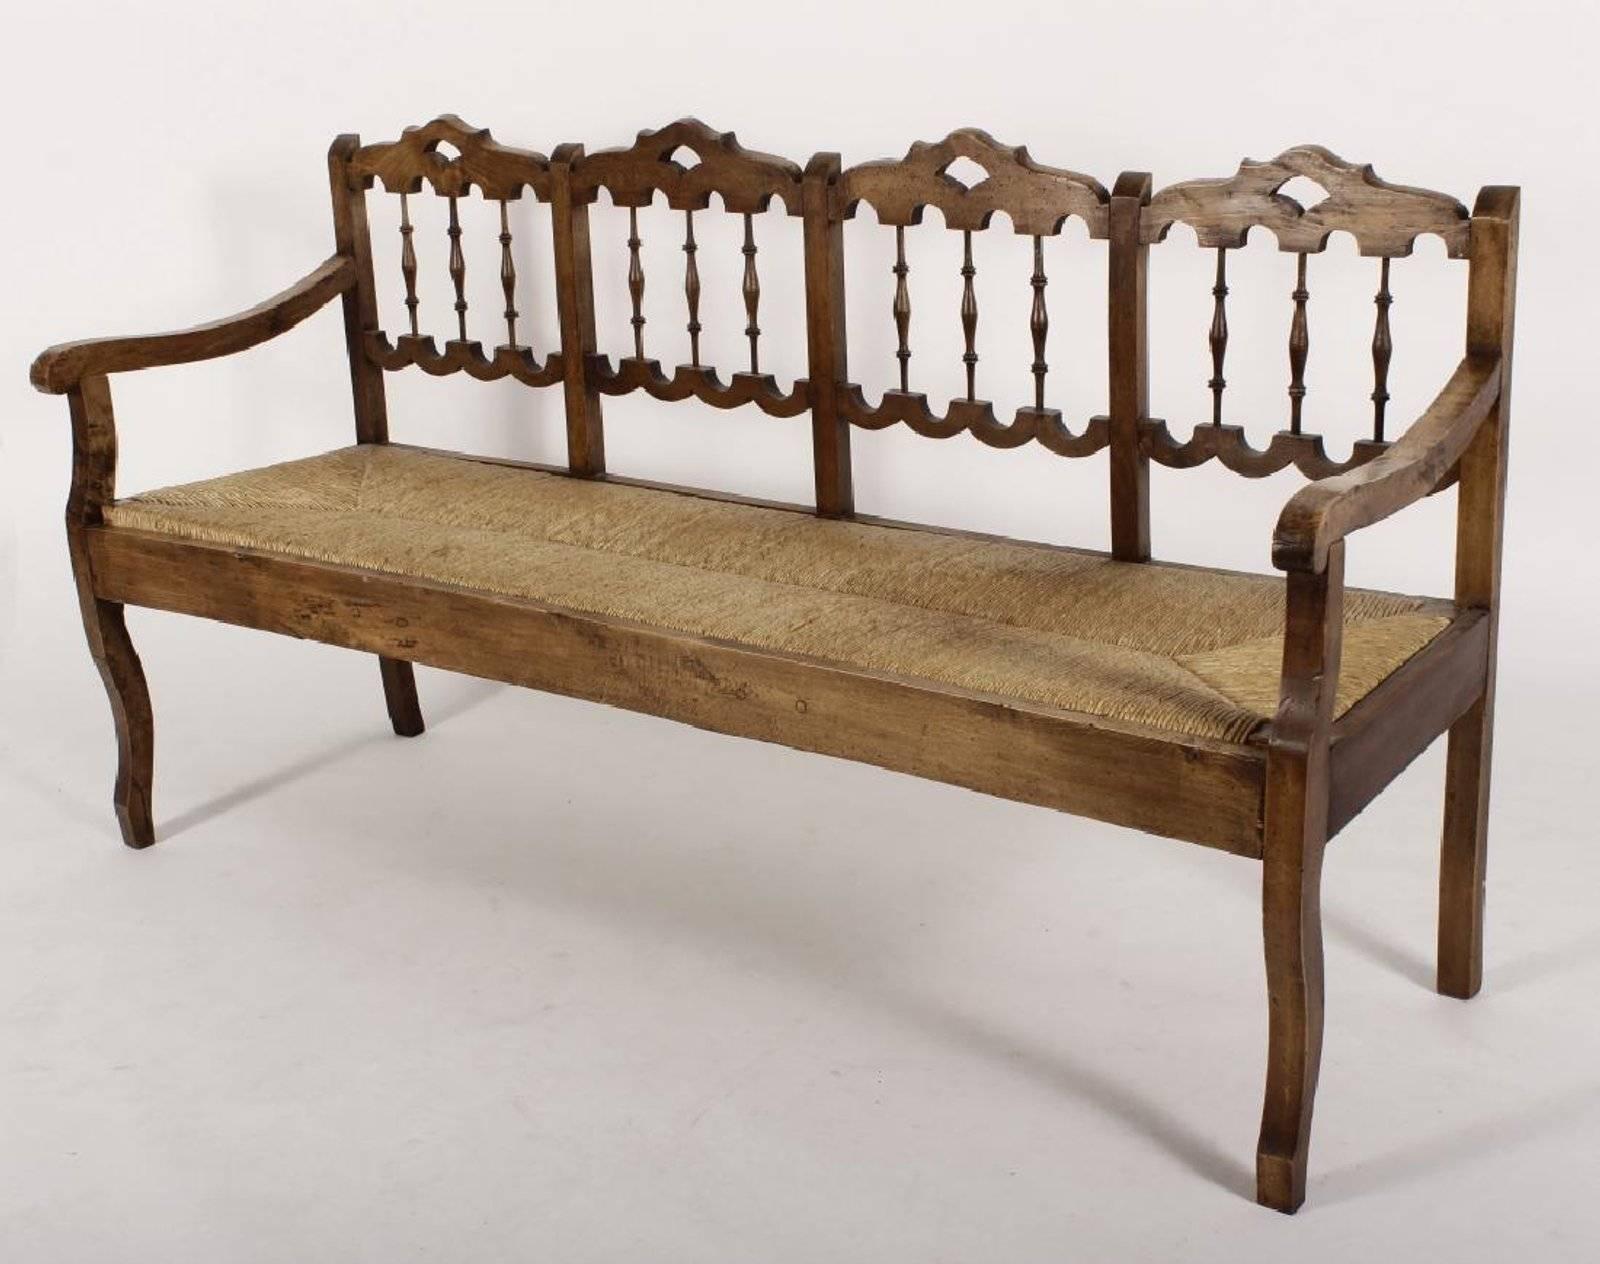 Anglo-Indian style turned wood, rush seat, spindle back bench.
Measure: Arm height 27